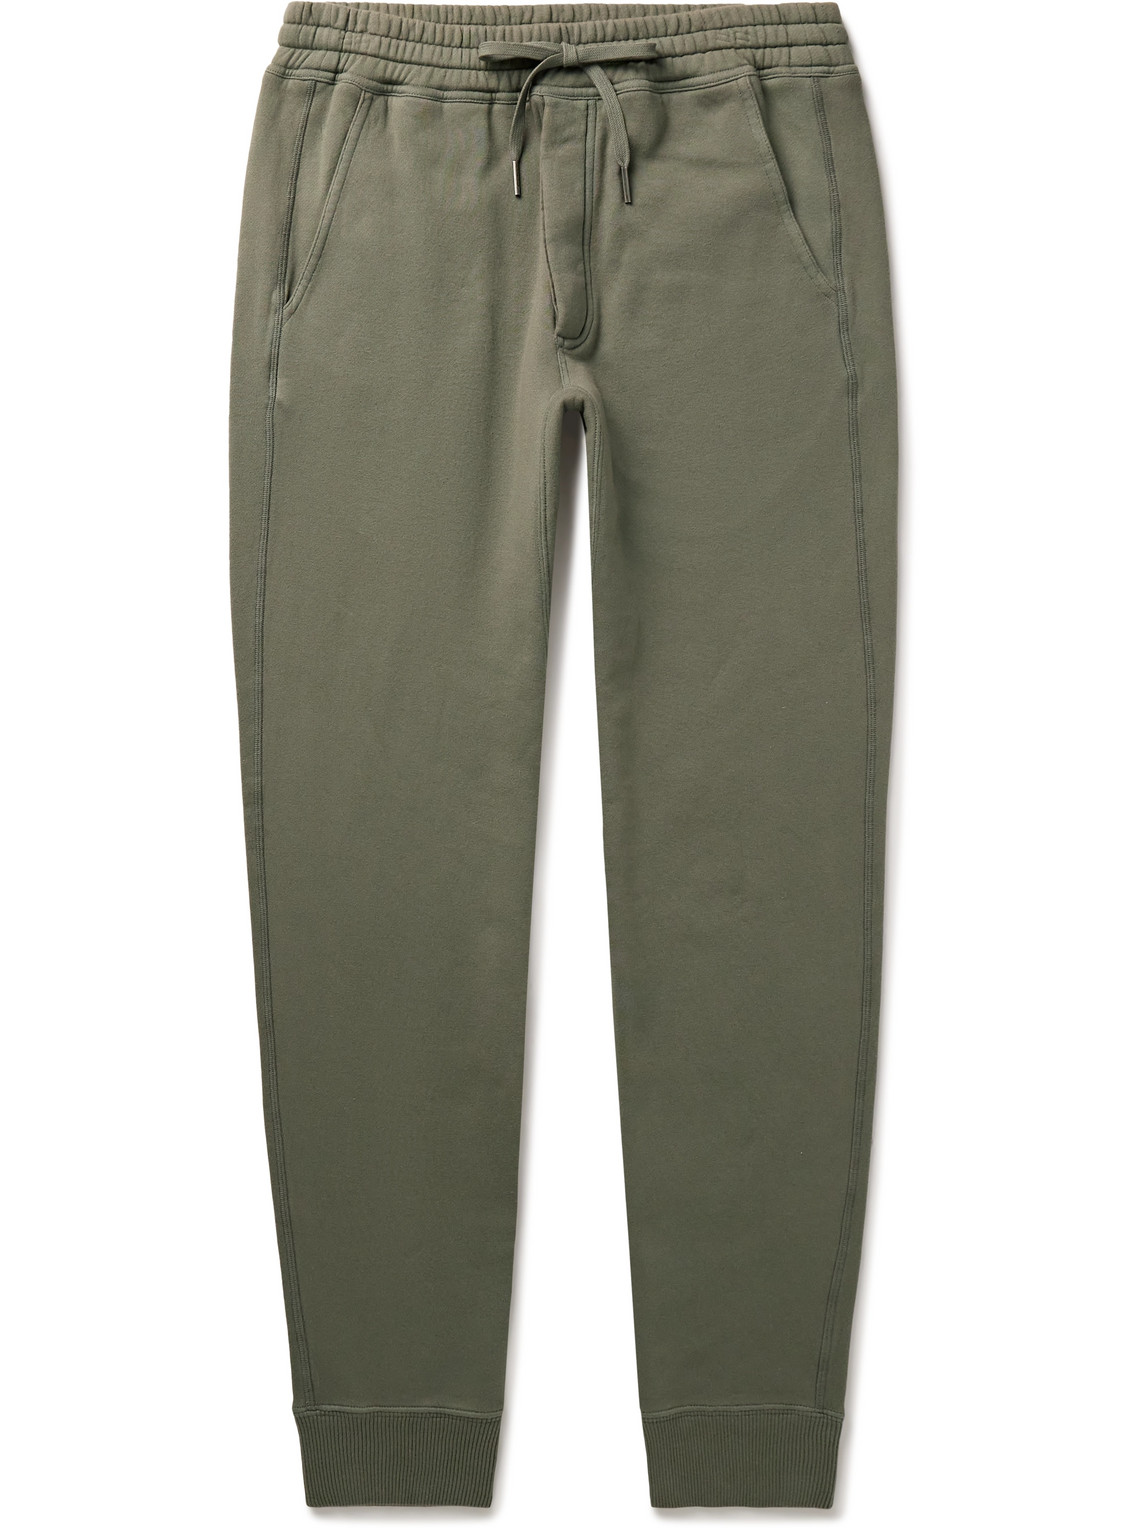 TOM FORD TAPERED GARMENT-DYED COTTON-JERSEY SWEATPANTS